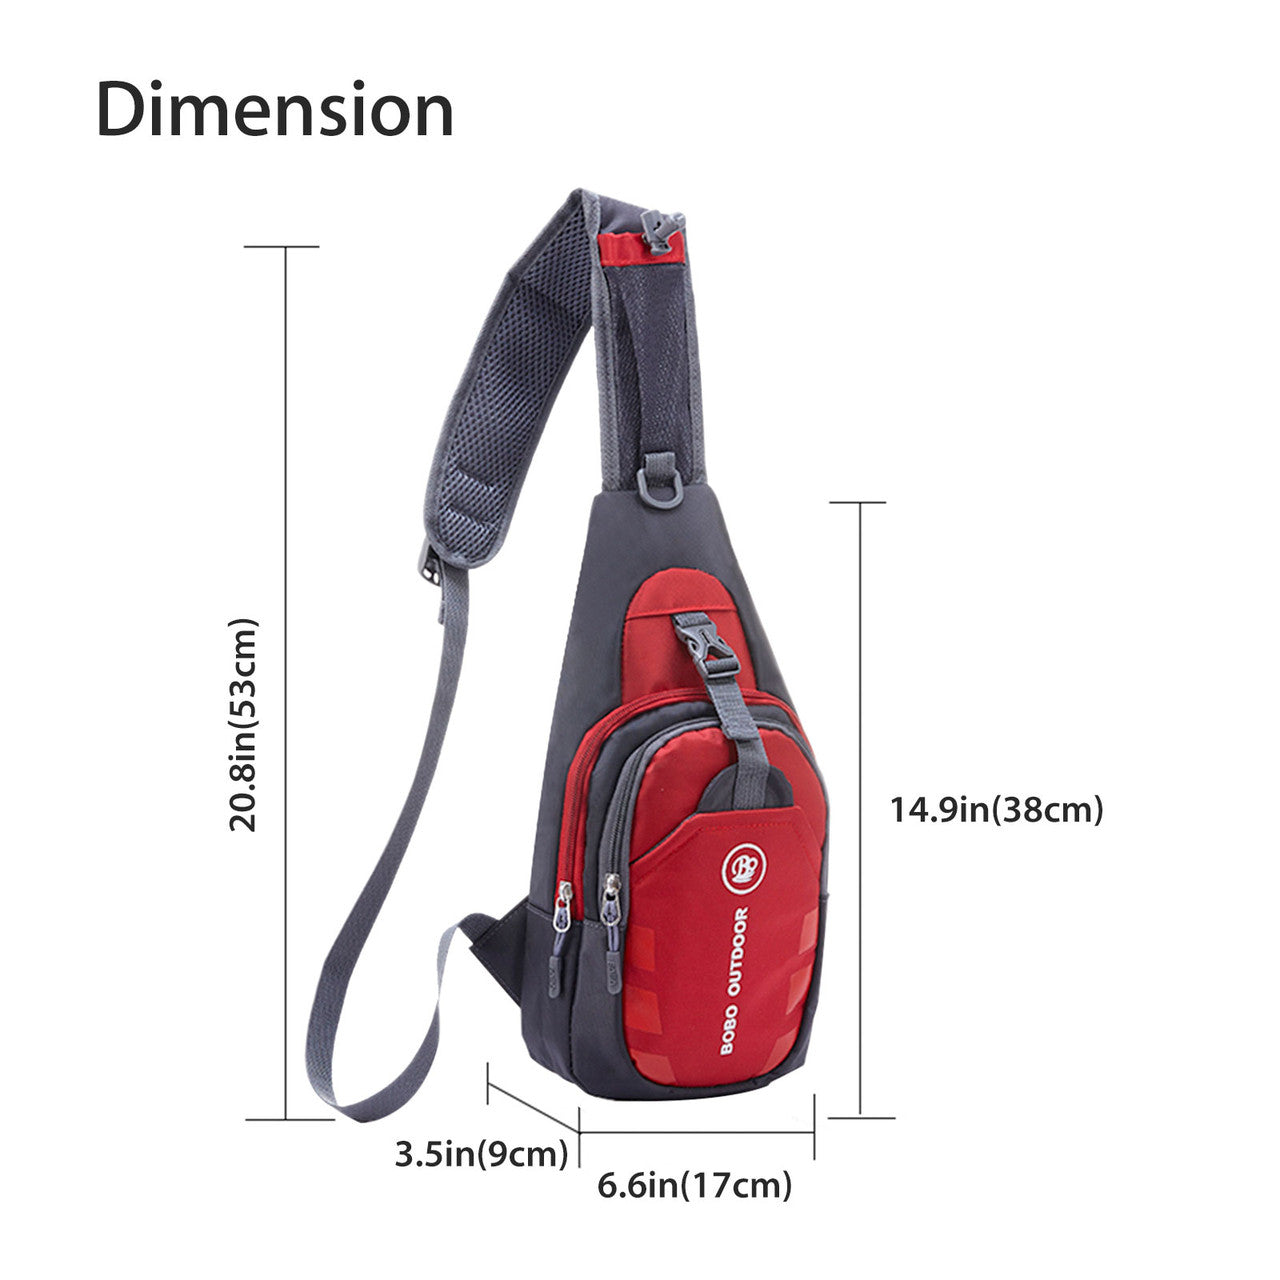 Sling Shoulder Bag, Comfortable Crossbody Chest Travel Hiking Backpack Compatible with Nintendo Switch, iPad, Books & Umbrella - Waterproof Nylon Crossbody Outdoor Bag (Red)